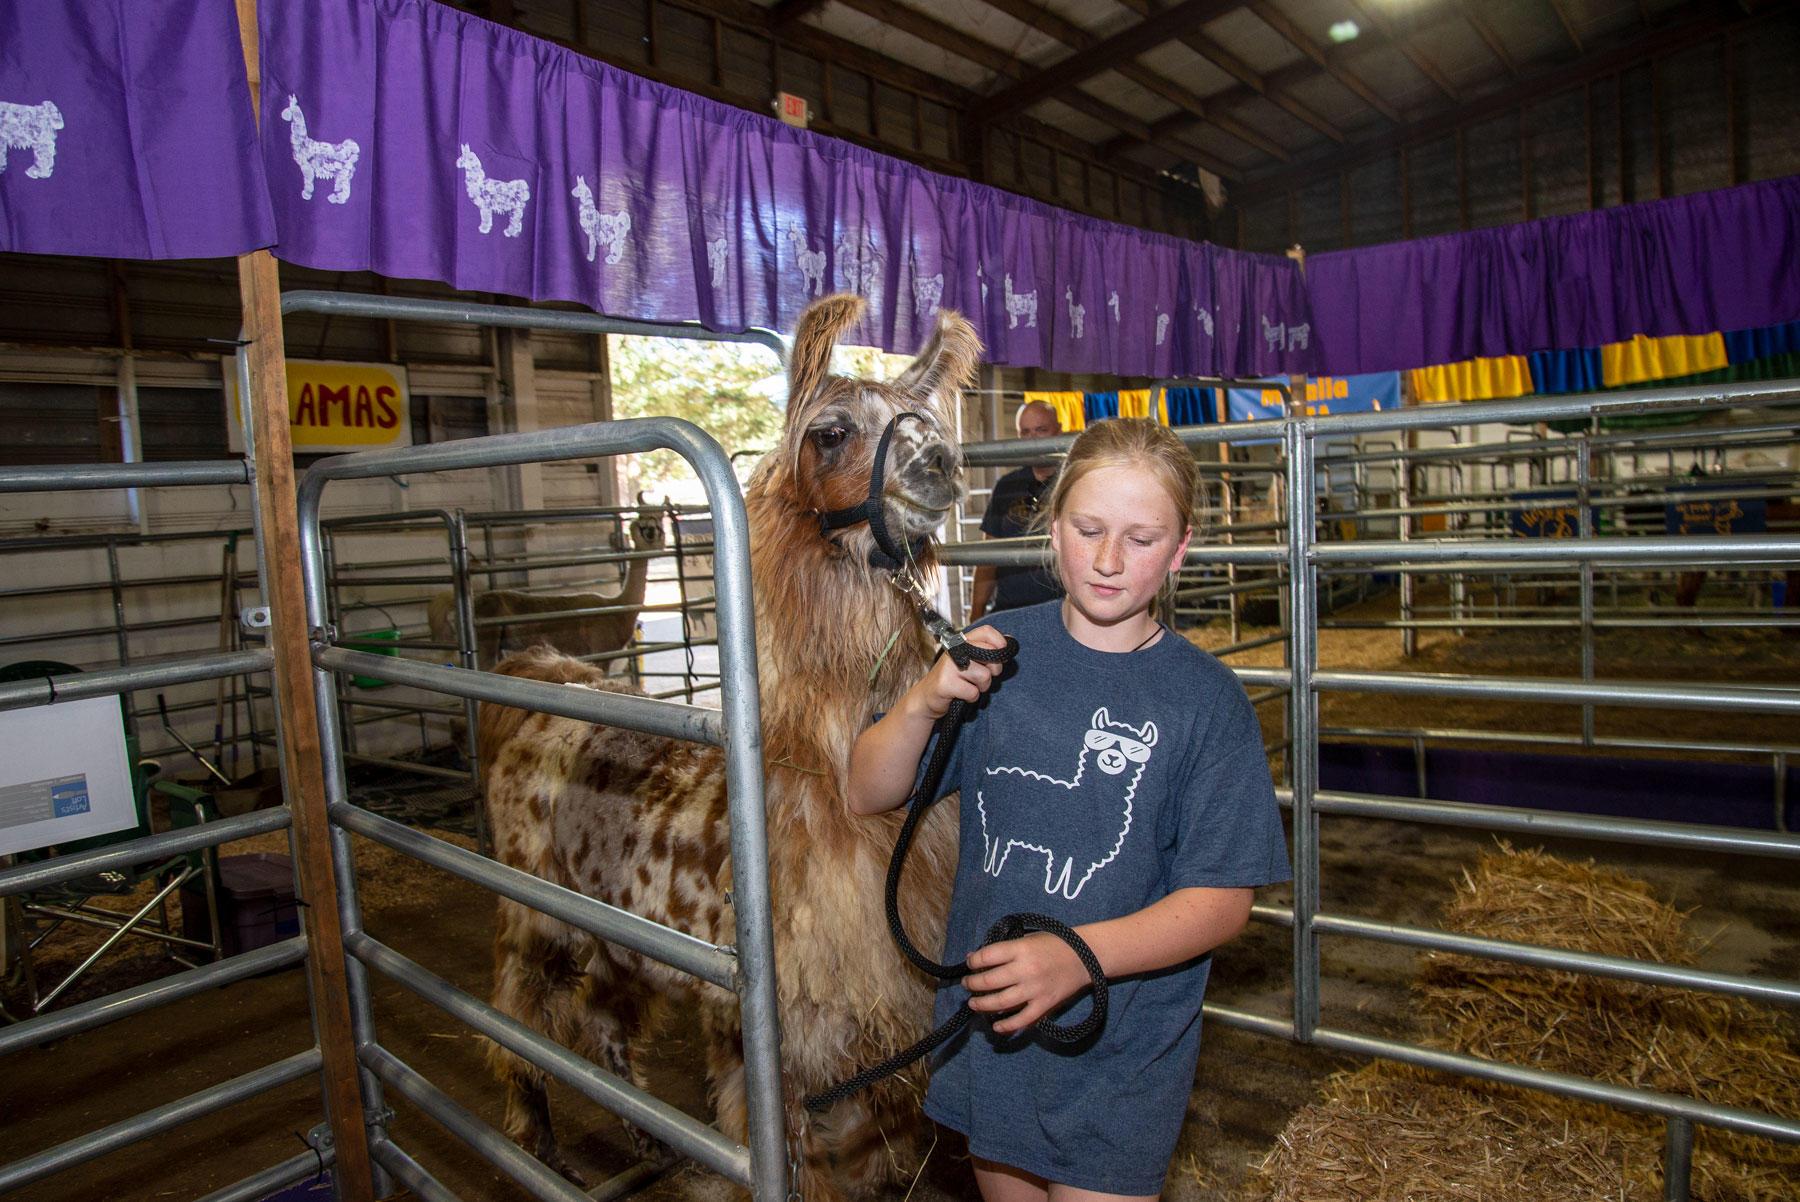 Harper Murray is in her second year of showing her llamas Willie and Teddy at the Clackamas County Fair.